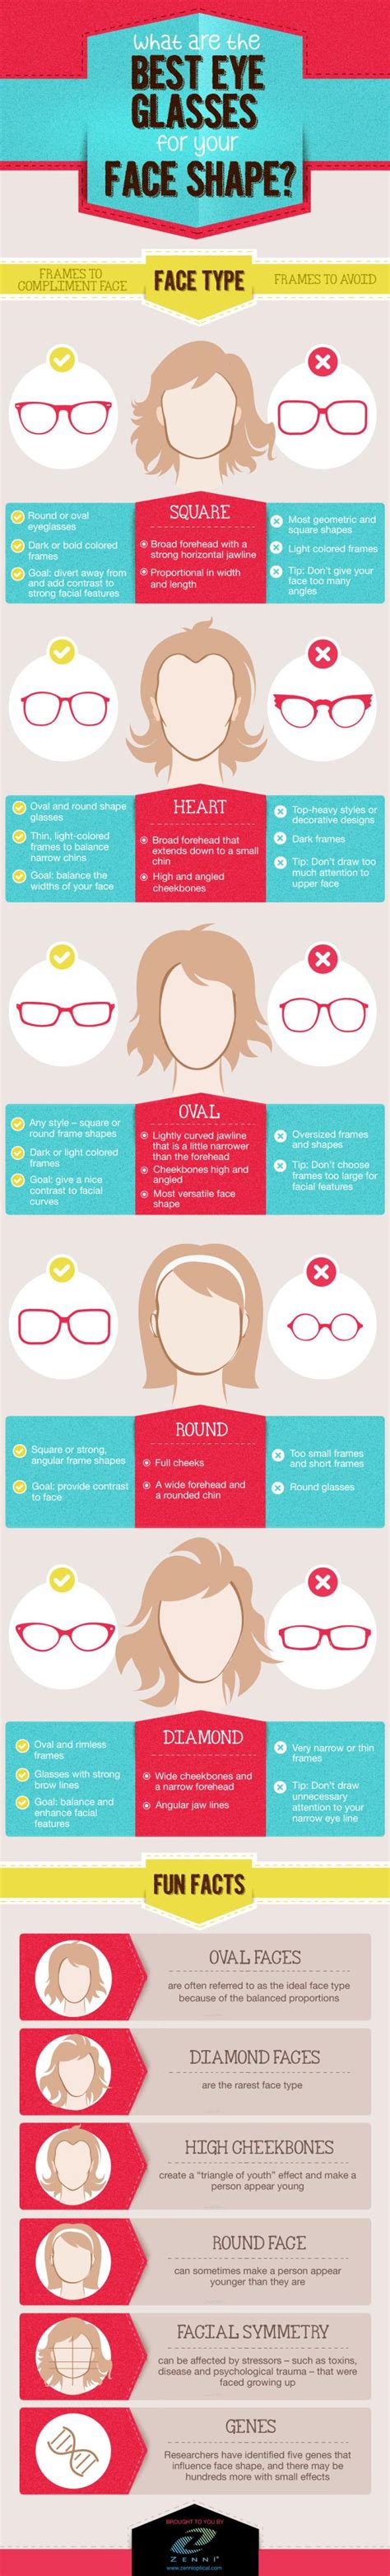 what are the best eyeglasses for your face shape justinfo graphics